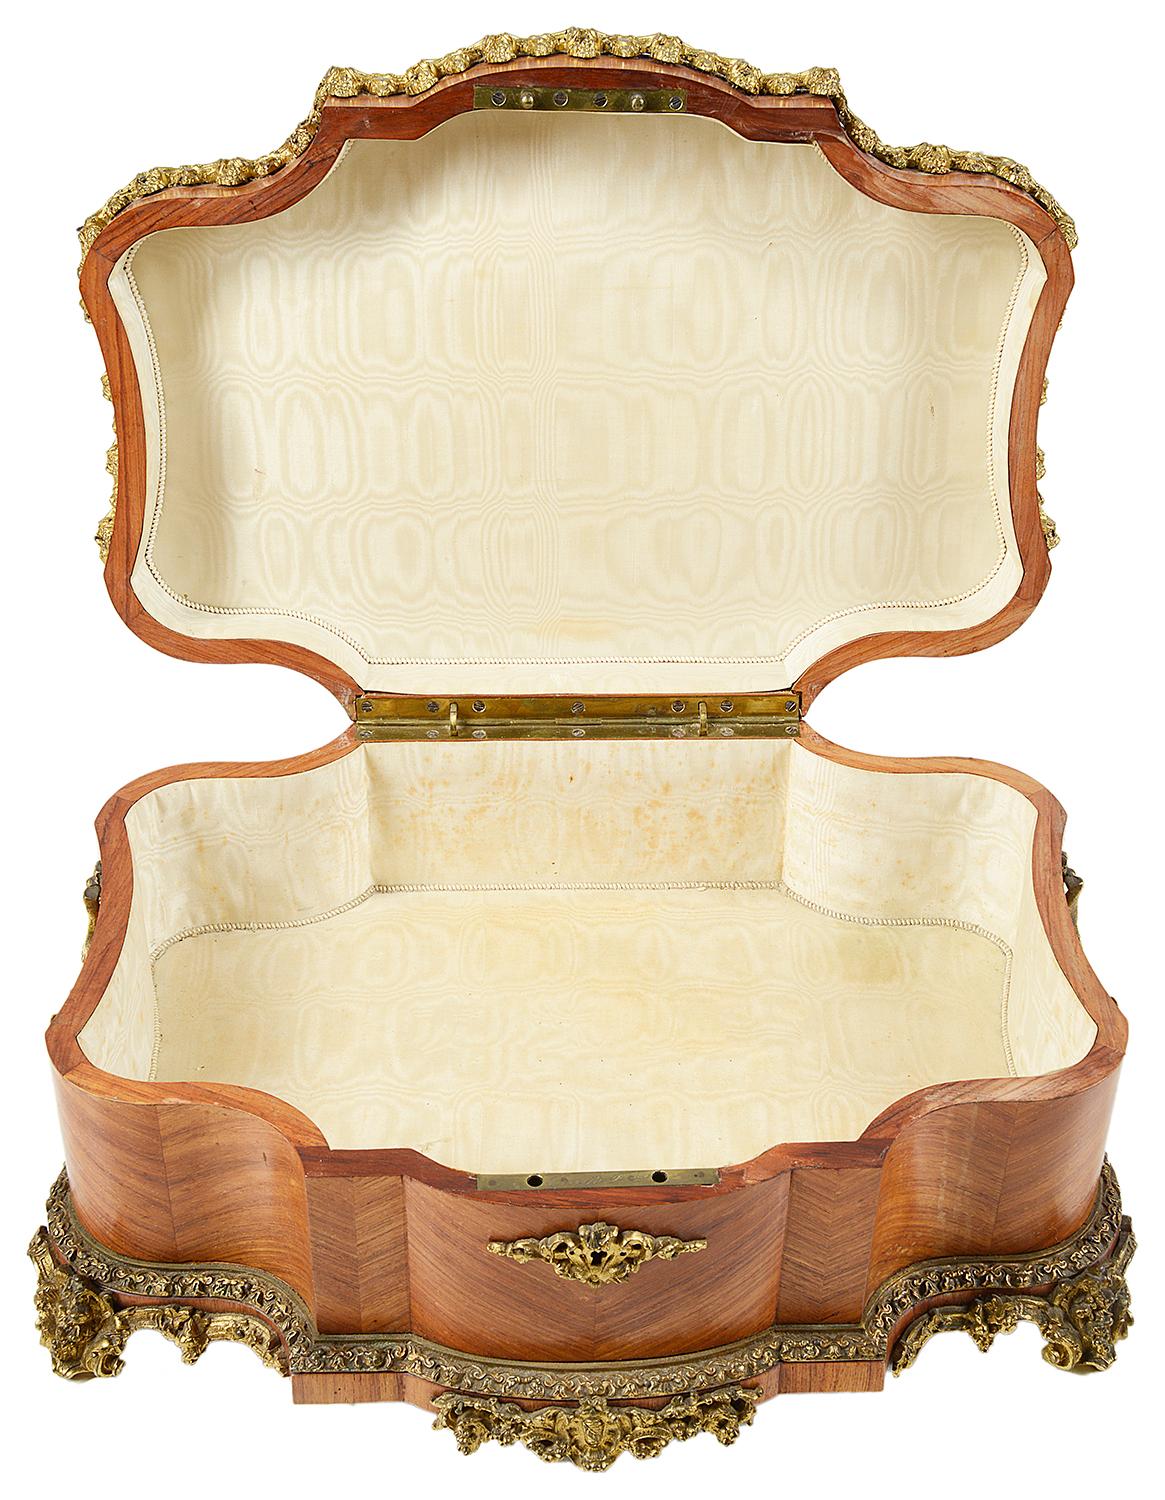 Porcelain 19th Century French Jewelry Box